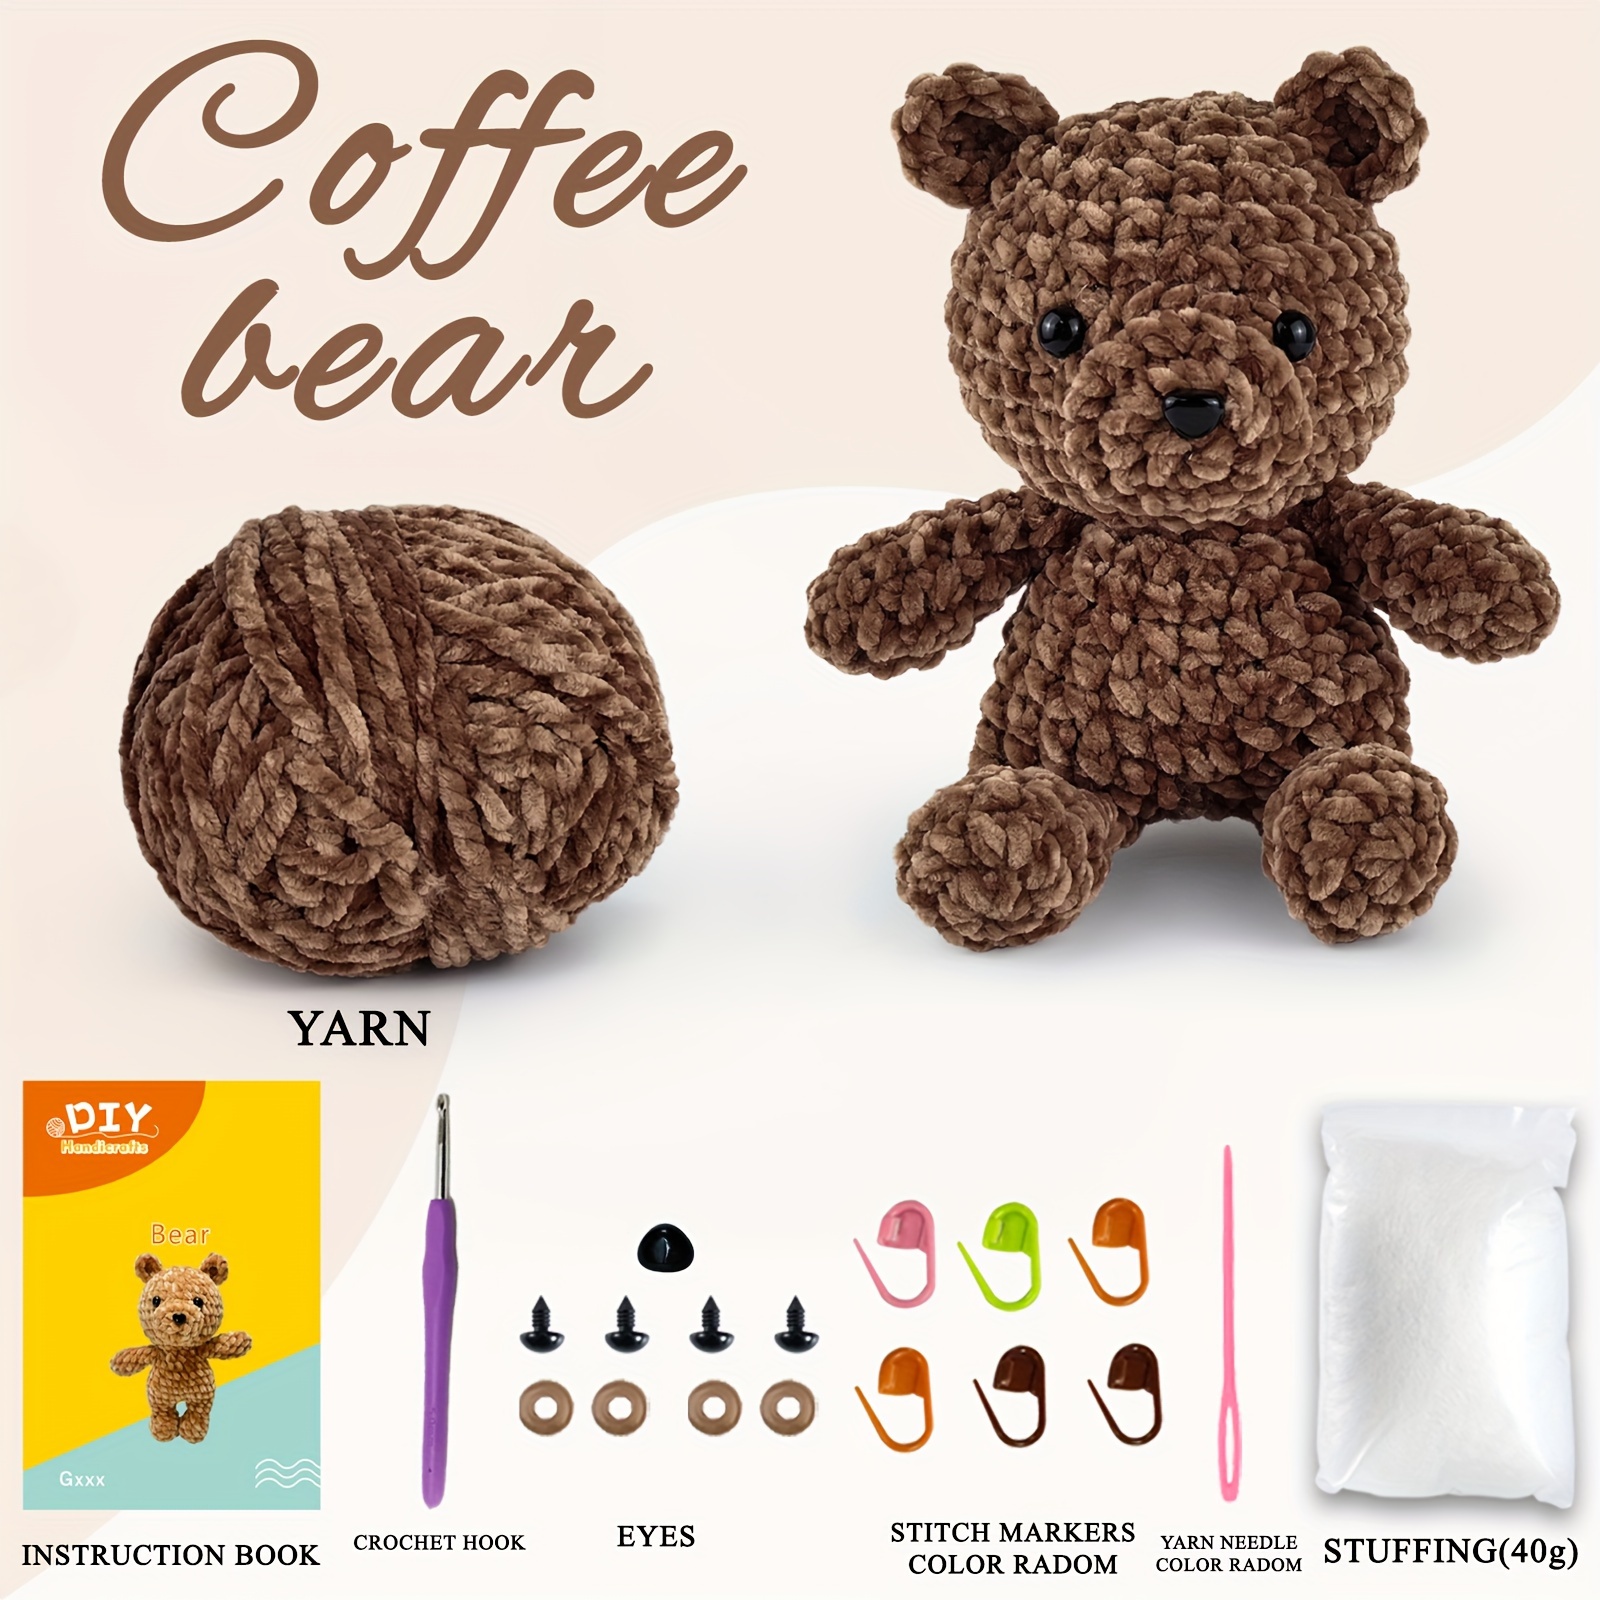 

Diy Crochet Kit For Beginners - Dark Brown Coffee Bear With Instruction Book And Video Tutorial - All-season Fabric Crafting Set With Tools And Accessories